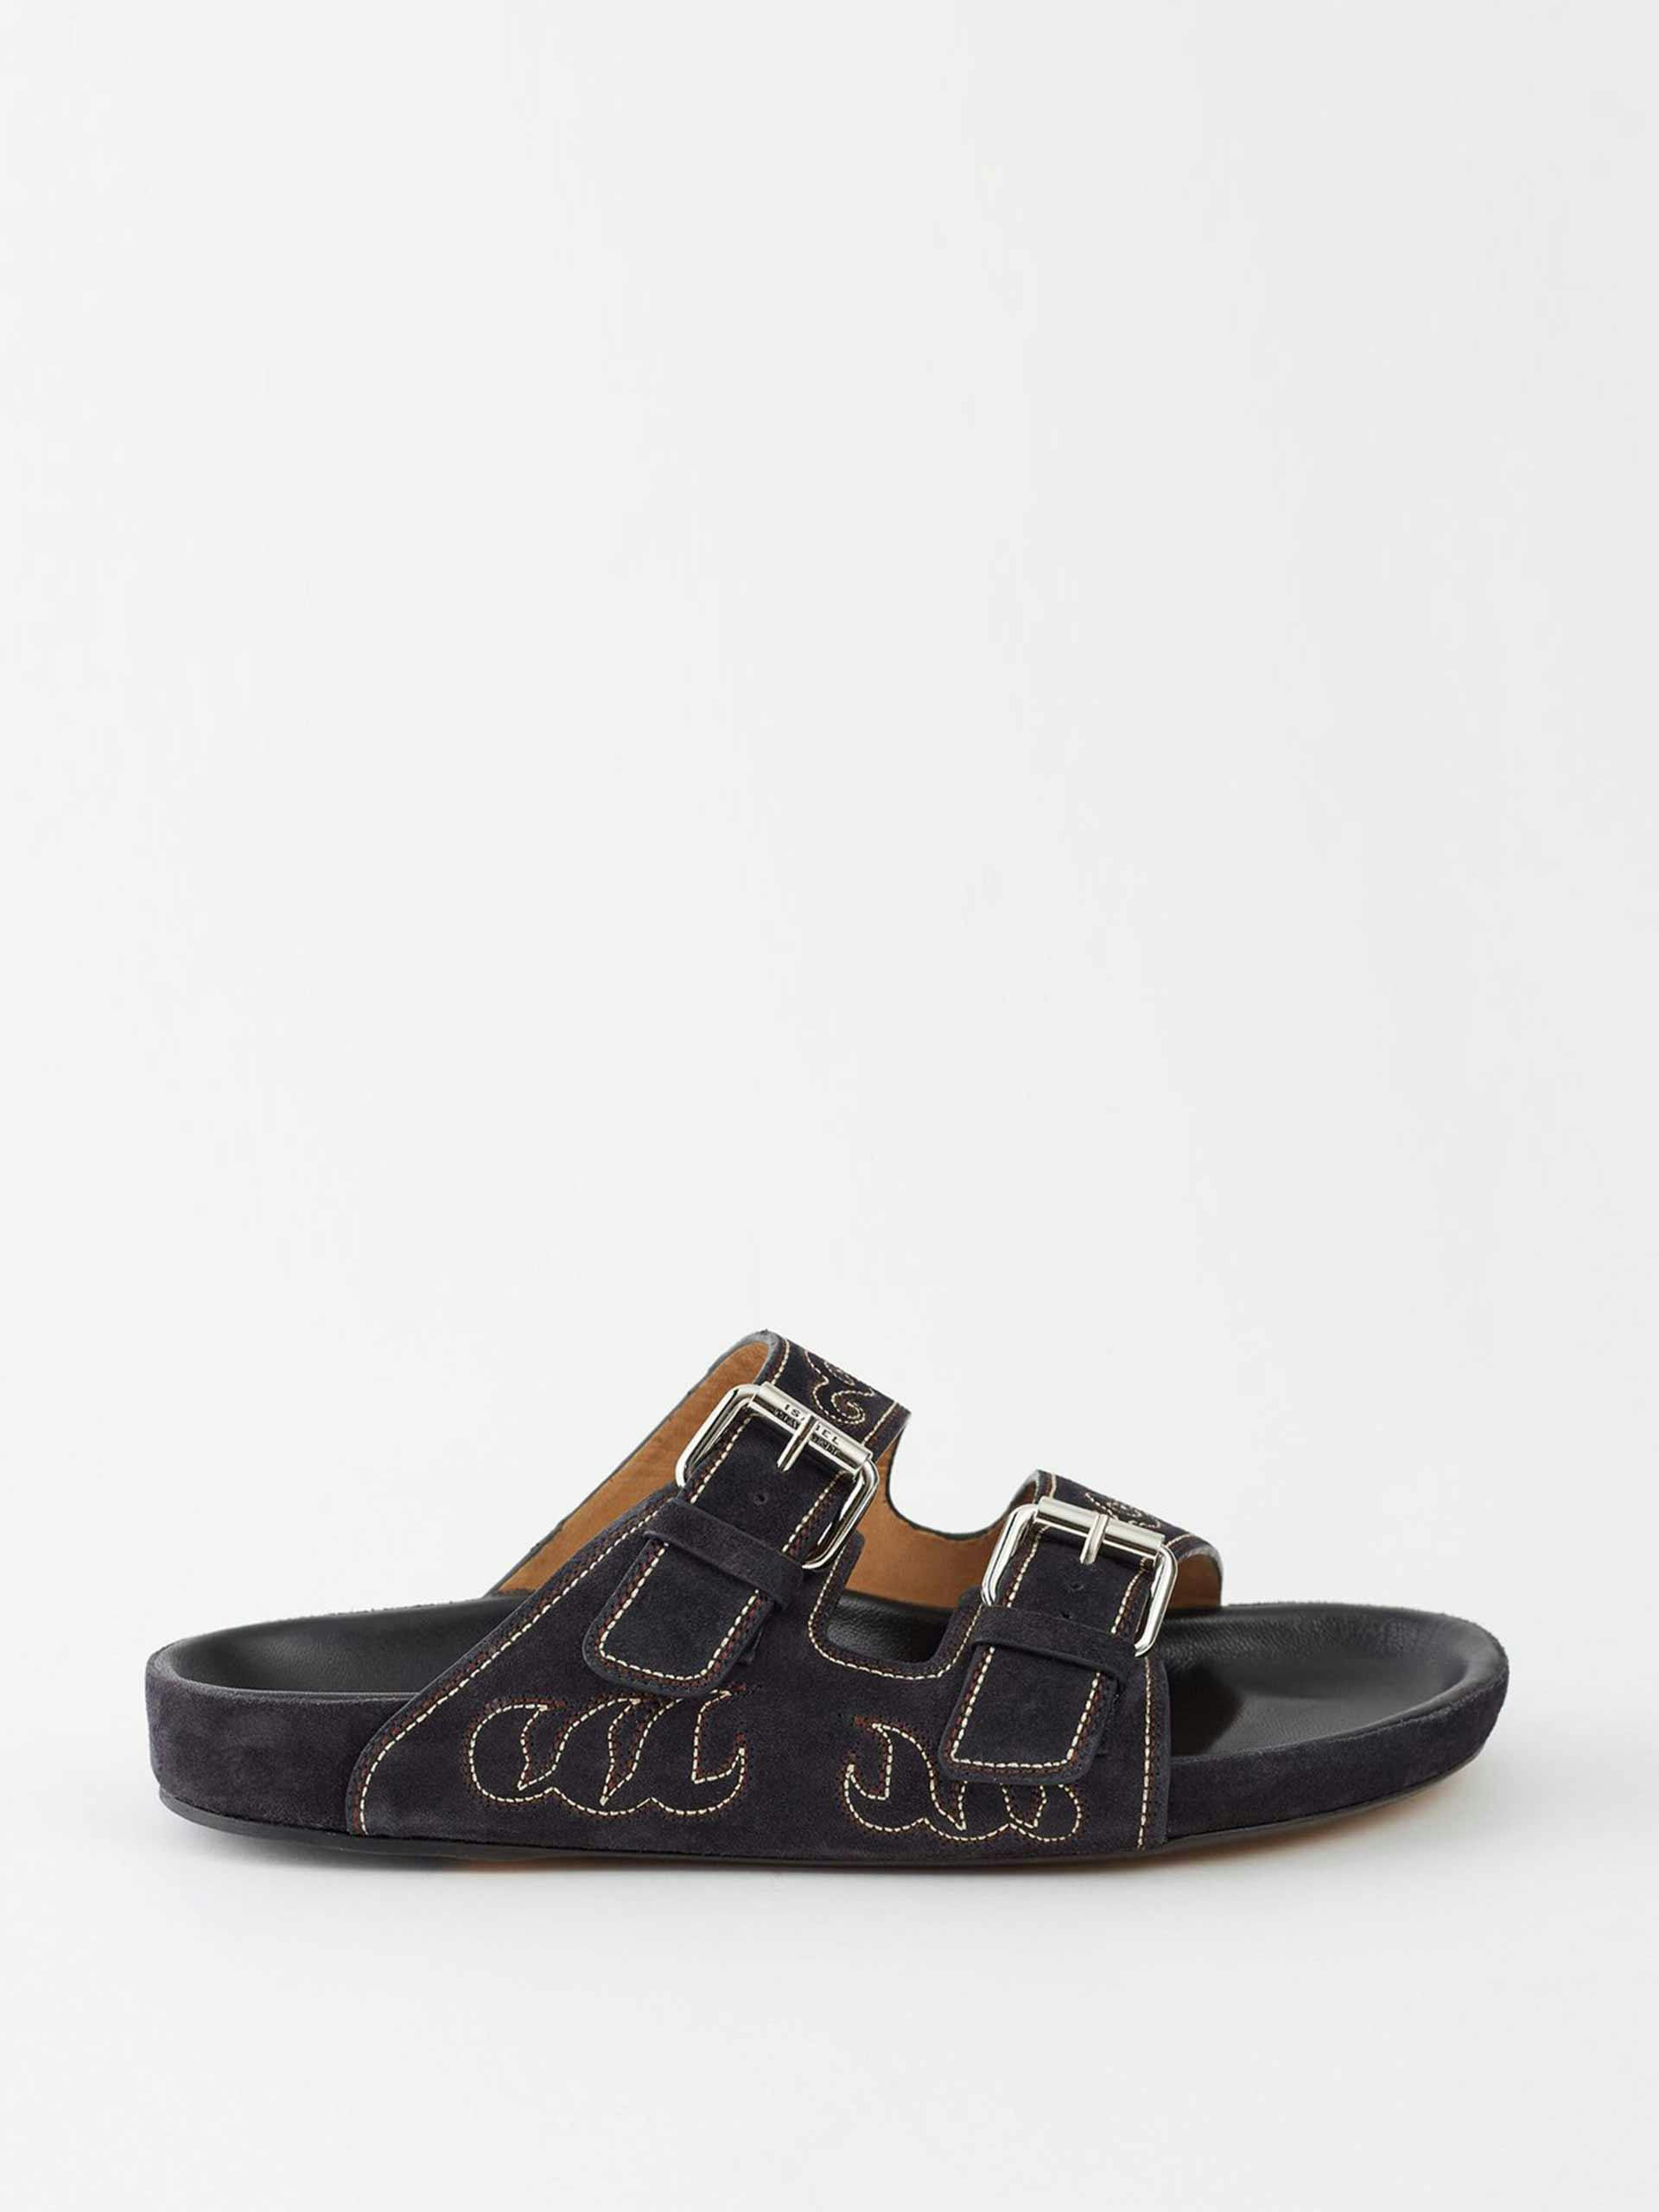 Black embroidered suede sandals